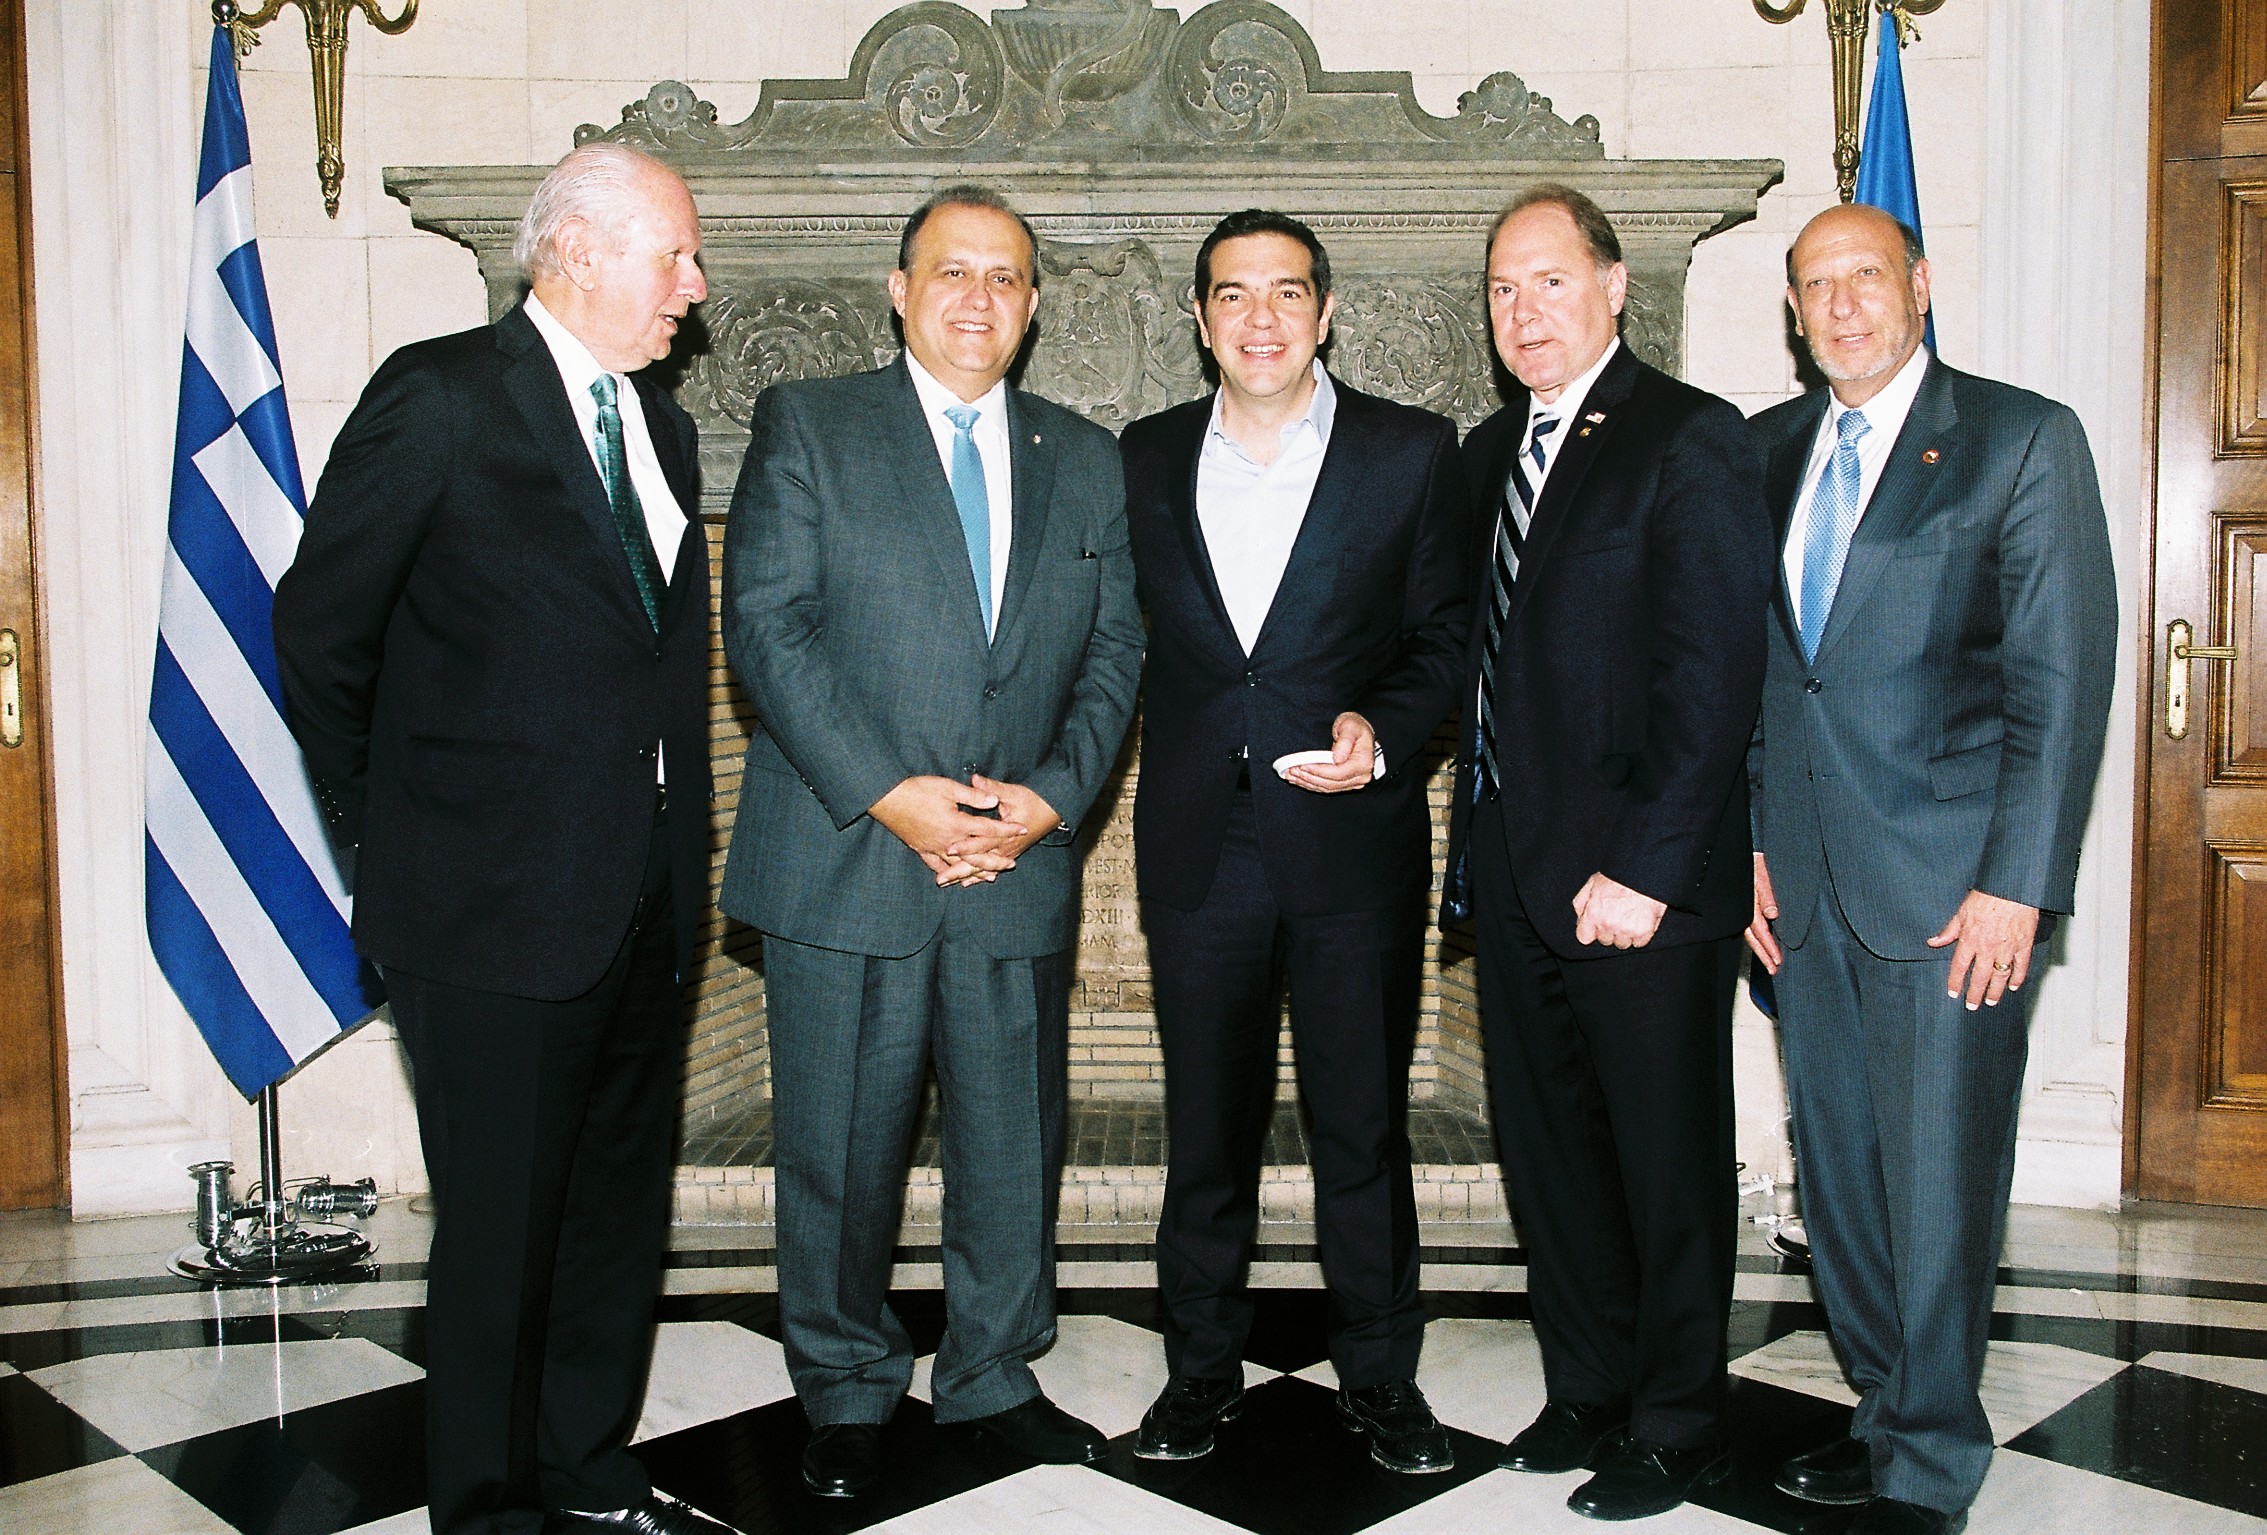  (L-R) Delegation Heads Stephen Greenberg, Chairman of the Conference of Presidents of Major American Jewish Organizations;&nbsp;Nick Larigakis, President of AHI; Prime Minister Alexis Tsipras, Prime Minister of Greece; Carl R. Hollister, Supreme Pre